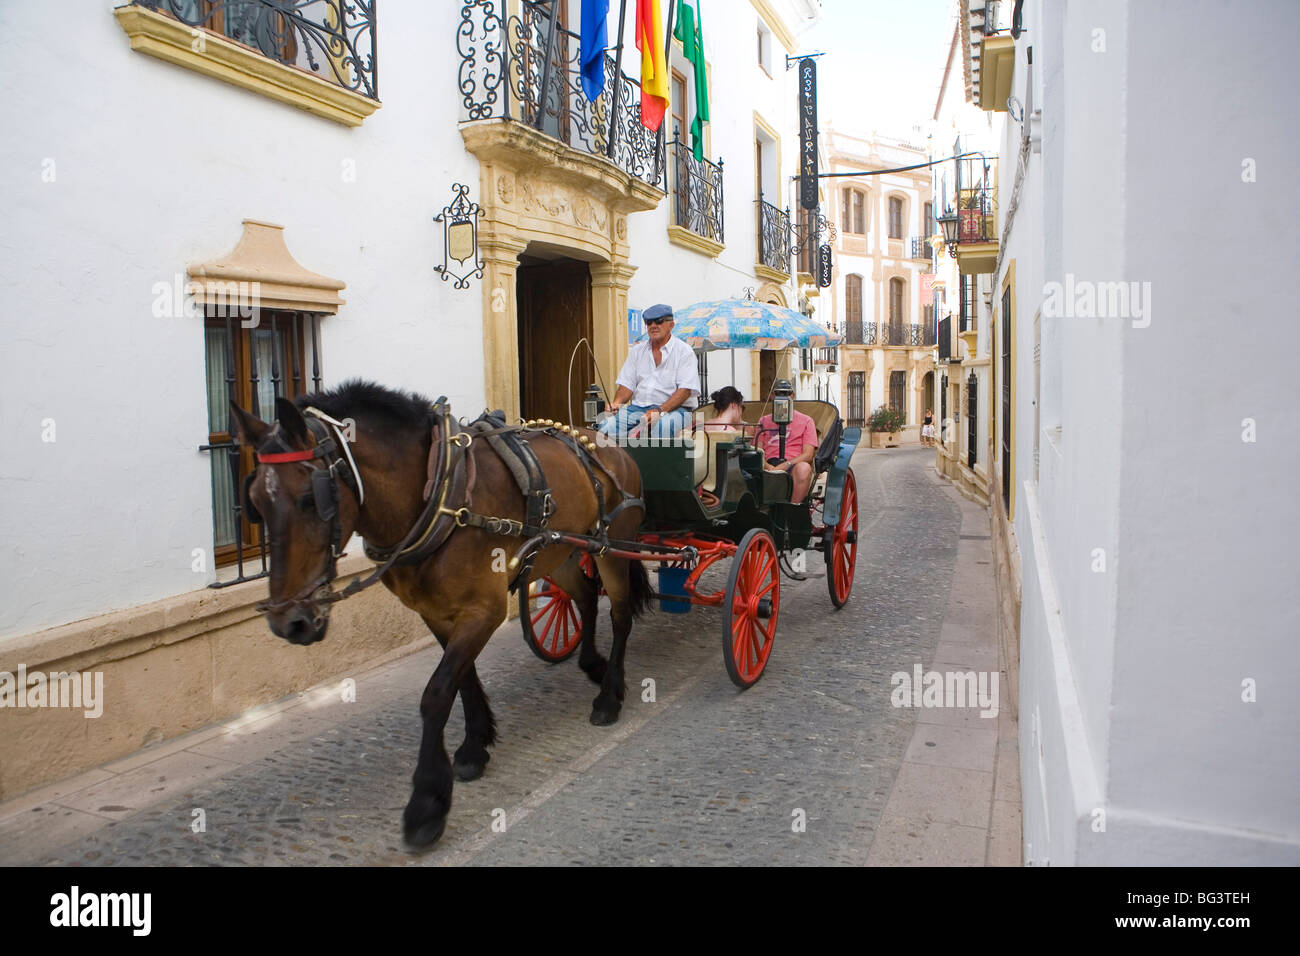 Horse drawn carriage, Ronda, one of the white villages, Malaga province, Andalucia, Spain, Europe Stock Photo